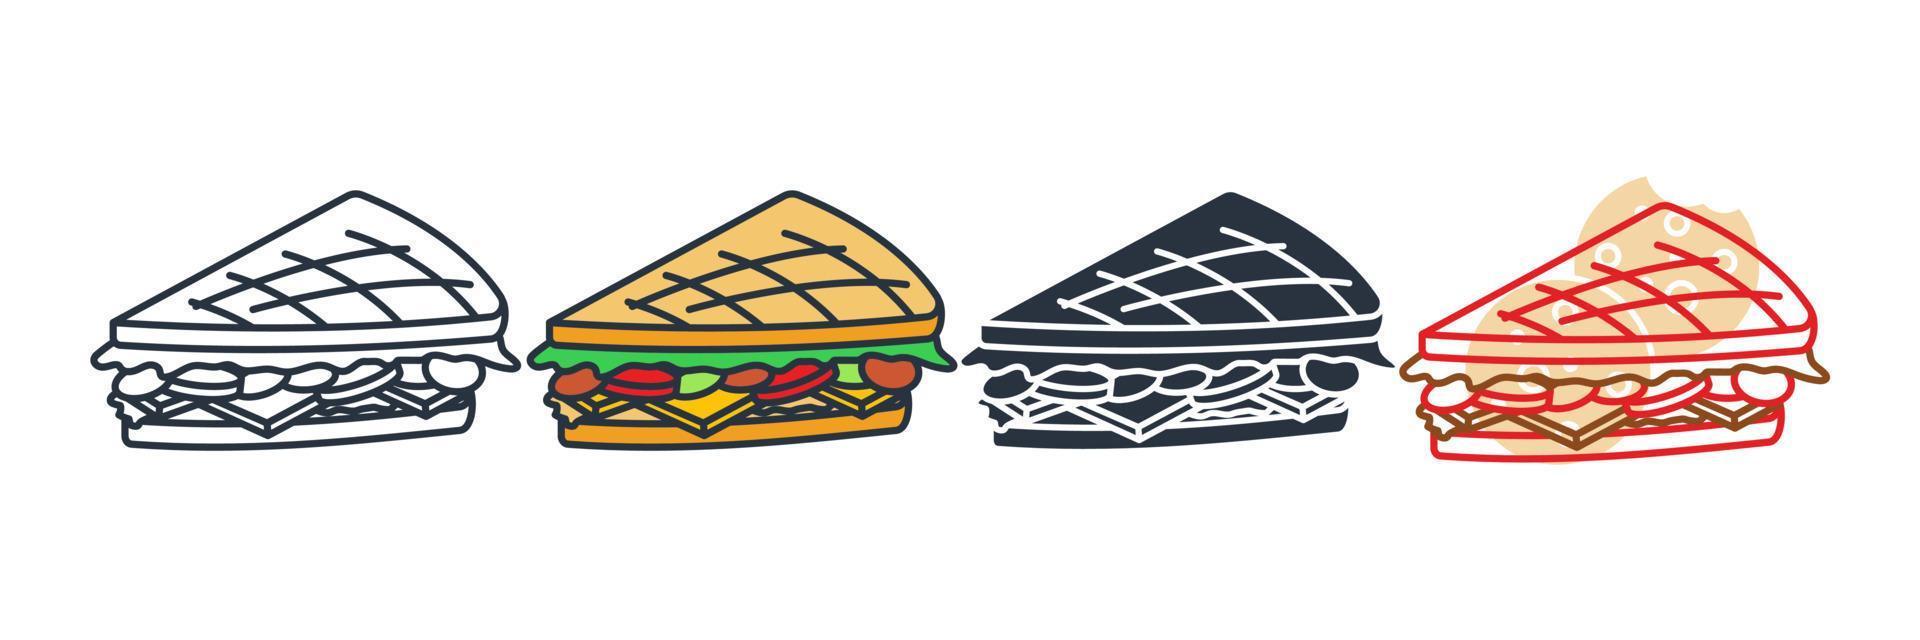 sandwich icon logo vector illustration. sandwich for breakfast and lunch symbol template for graphic and web design collection